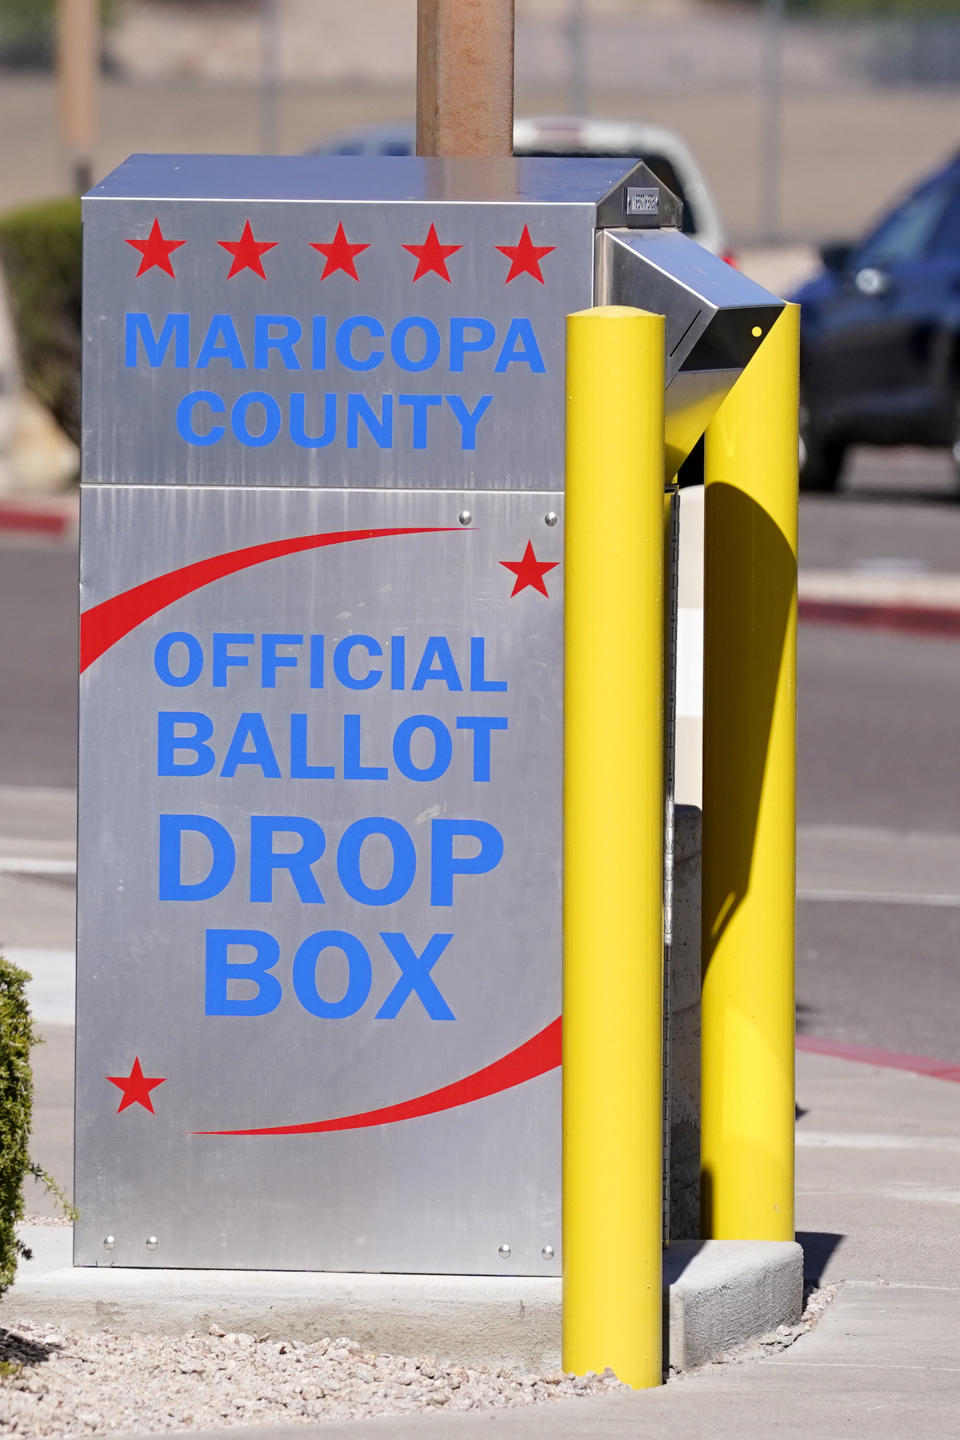 A Maricopa County election voting drop box shown here in Mesa, Ariz., Friday, Oct. 28, 2022. (AP Photo/Ross D. Franklin)